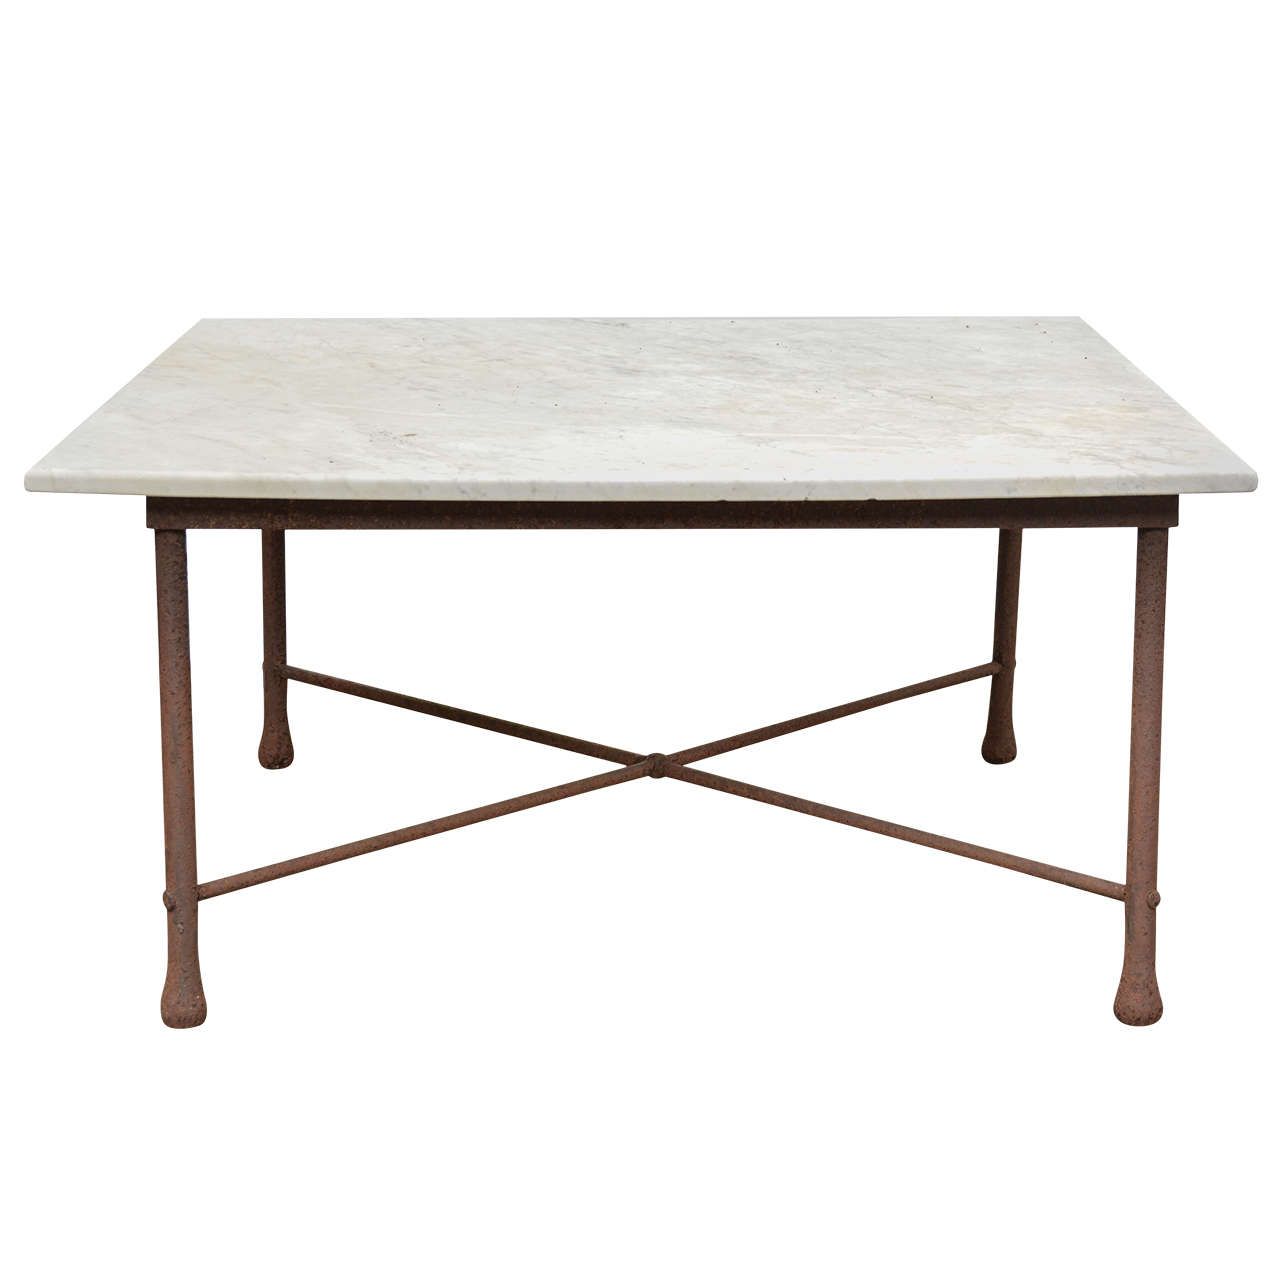 Iron And White Marble Desks In Well Known American 1970s Wrought Iron Coffee Table With Marble Top For Sale At (View 6 of 15)